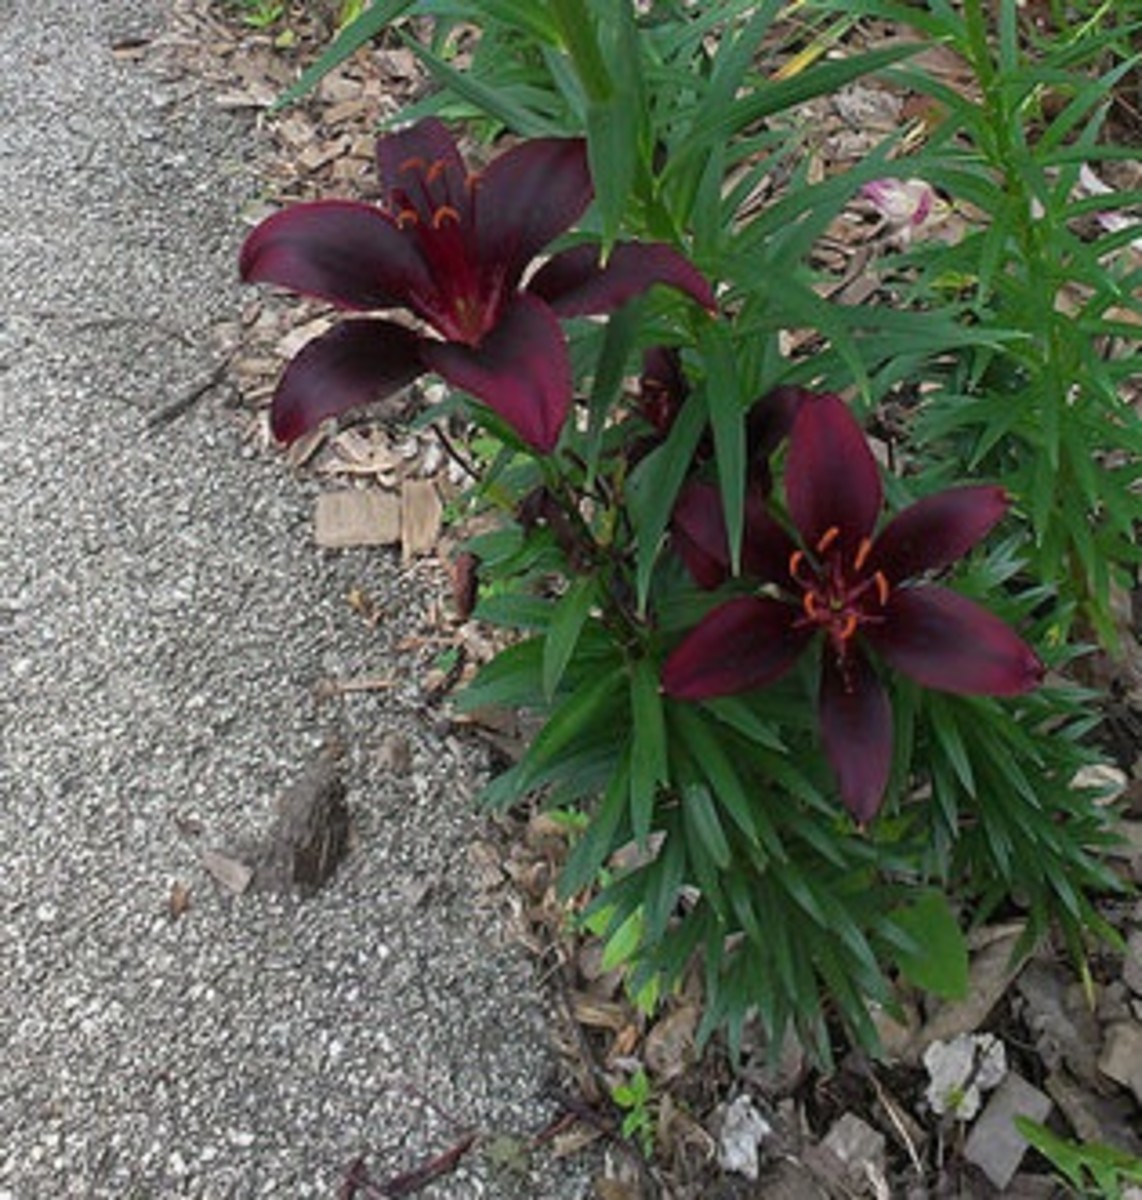 Asiatic Lily "Landini". A very striking dark colored variety